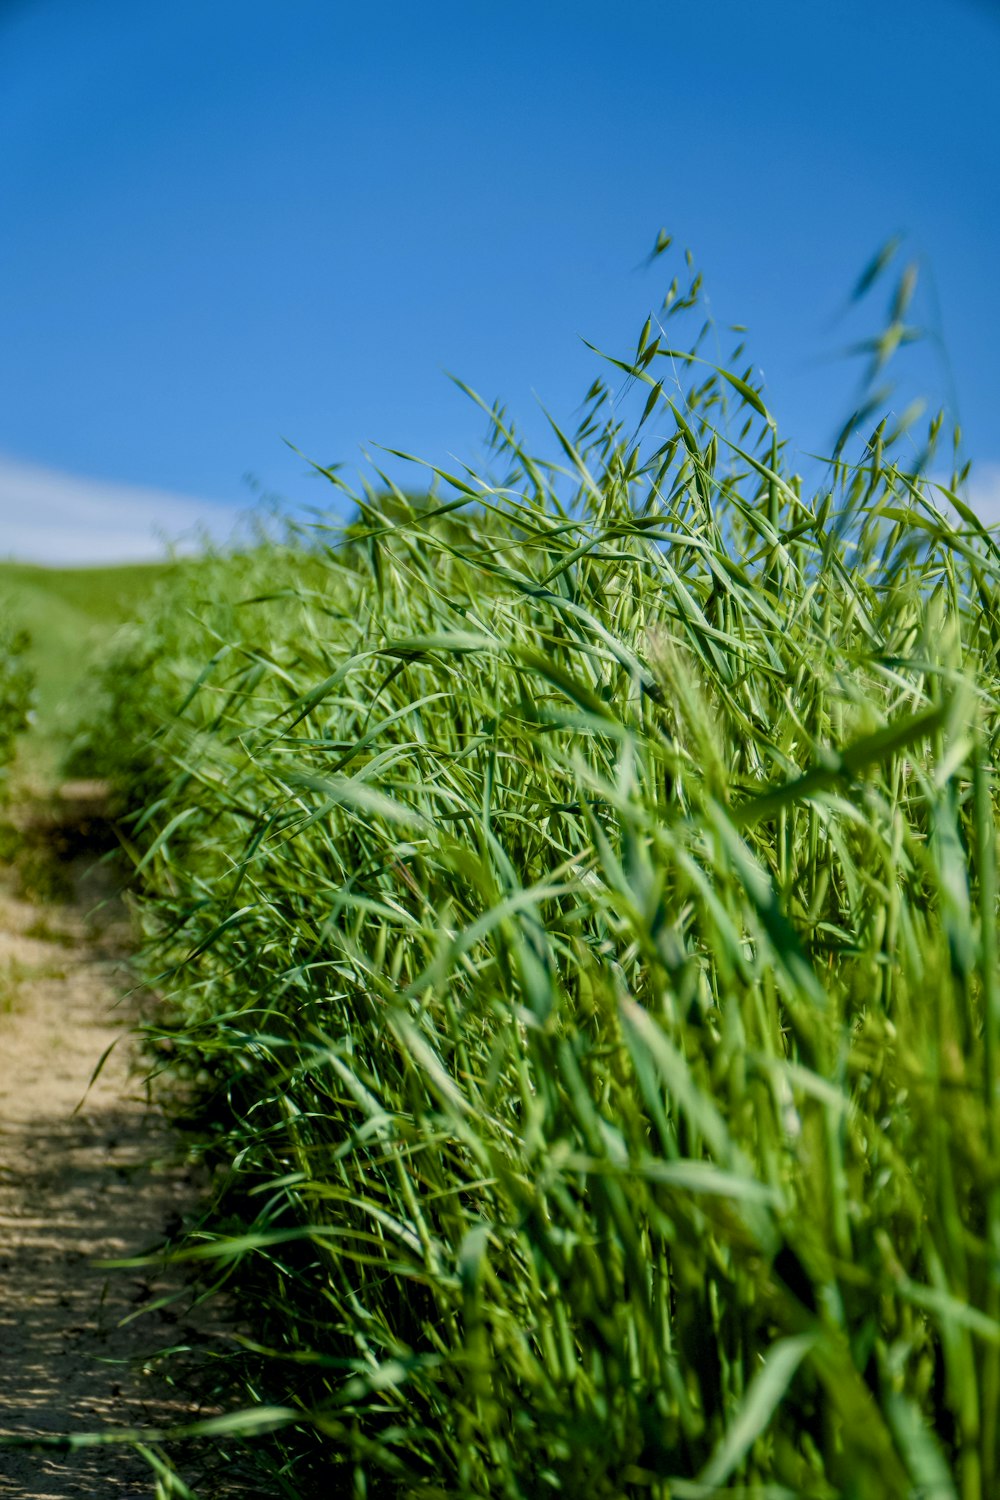 a path through a grassy field with a blue sky in the background